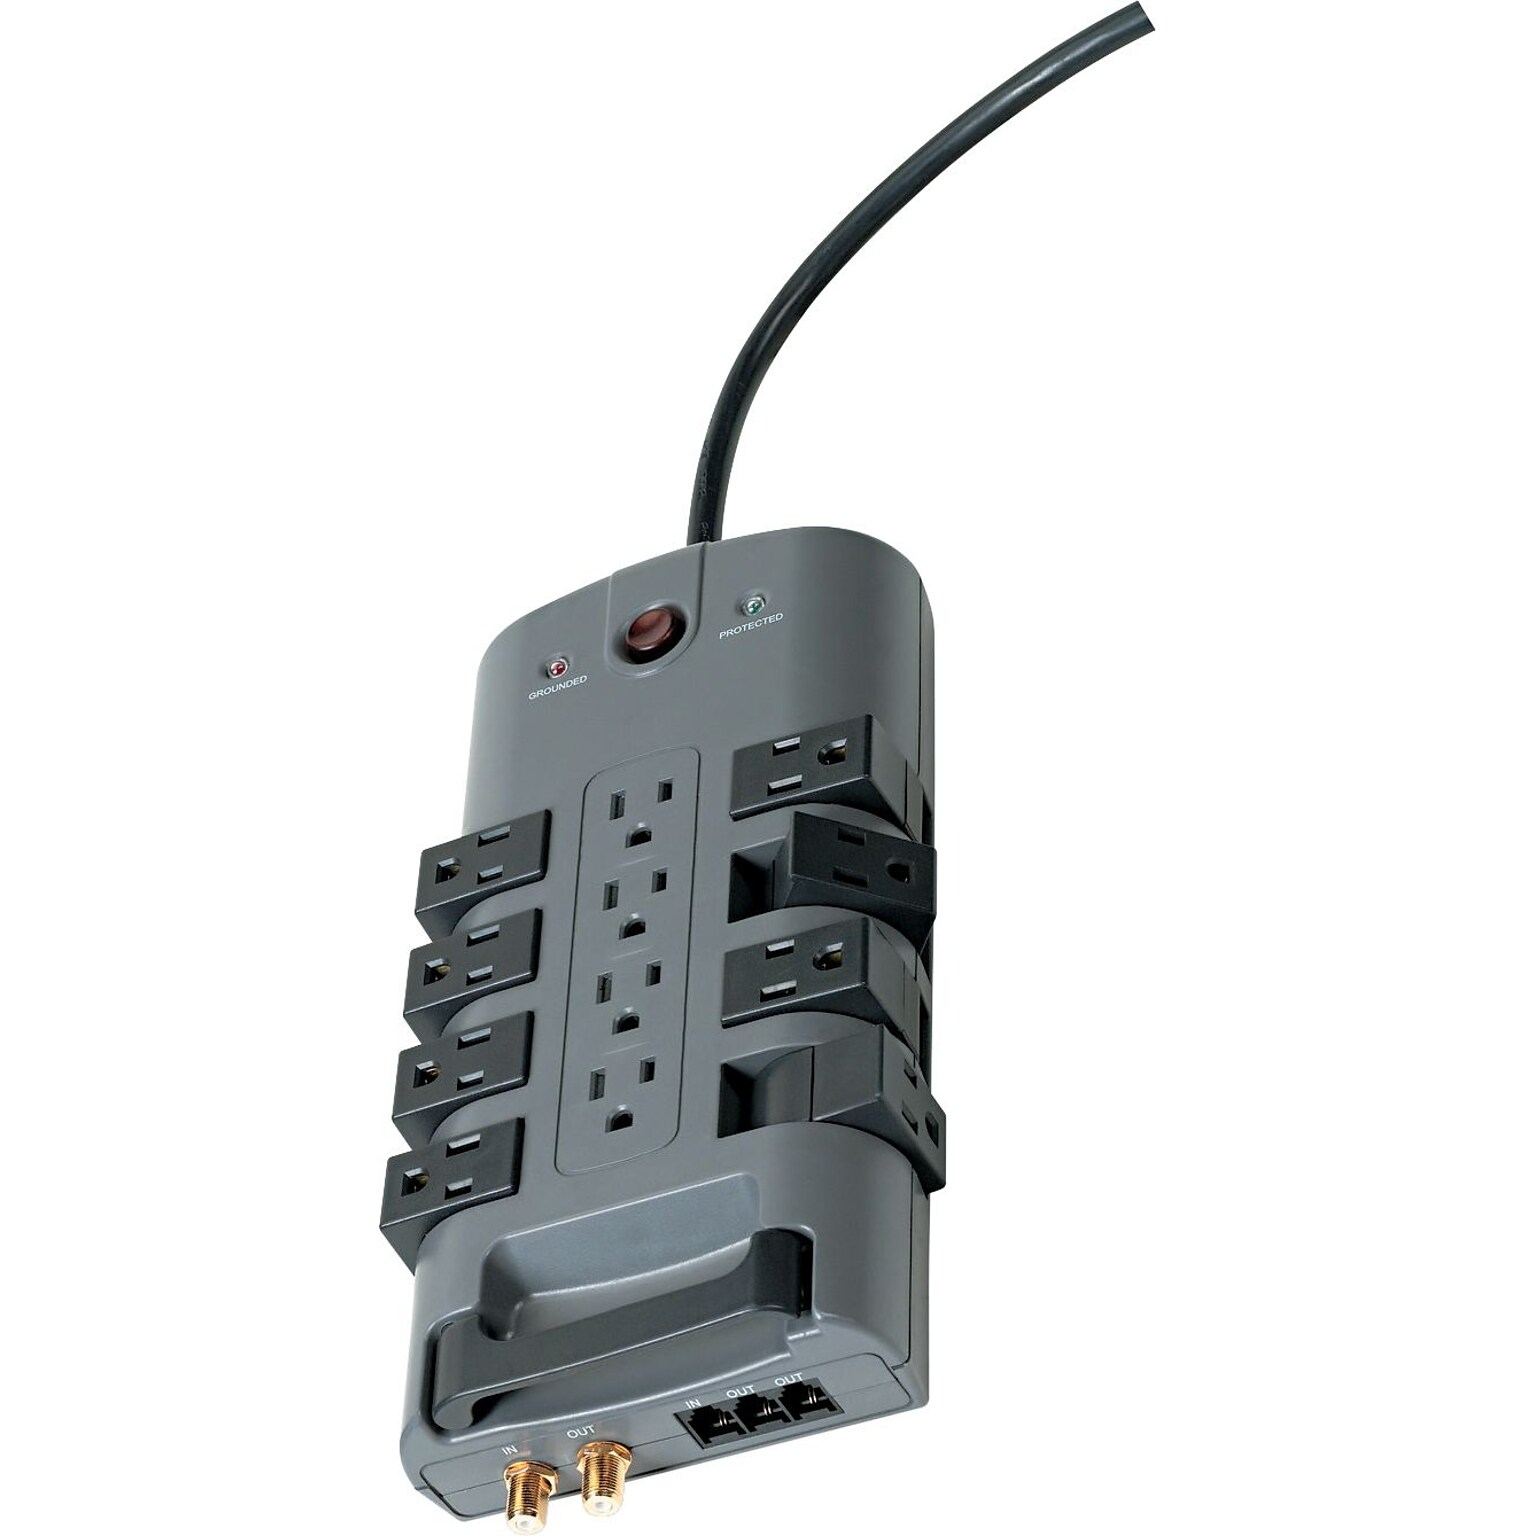 Belkin Surge Protector, 12 Outlets, 4,320 Joules